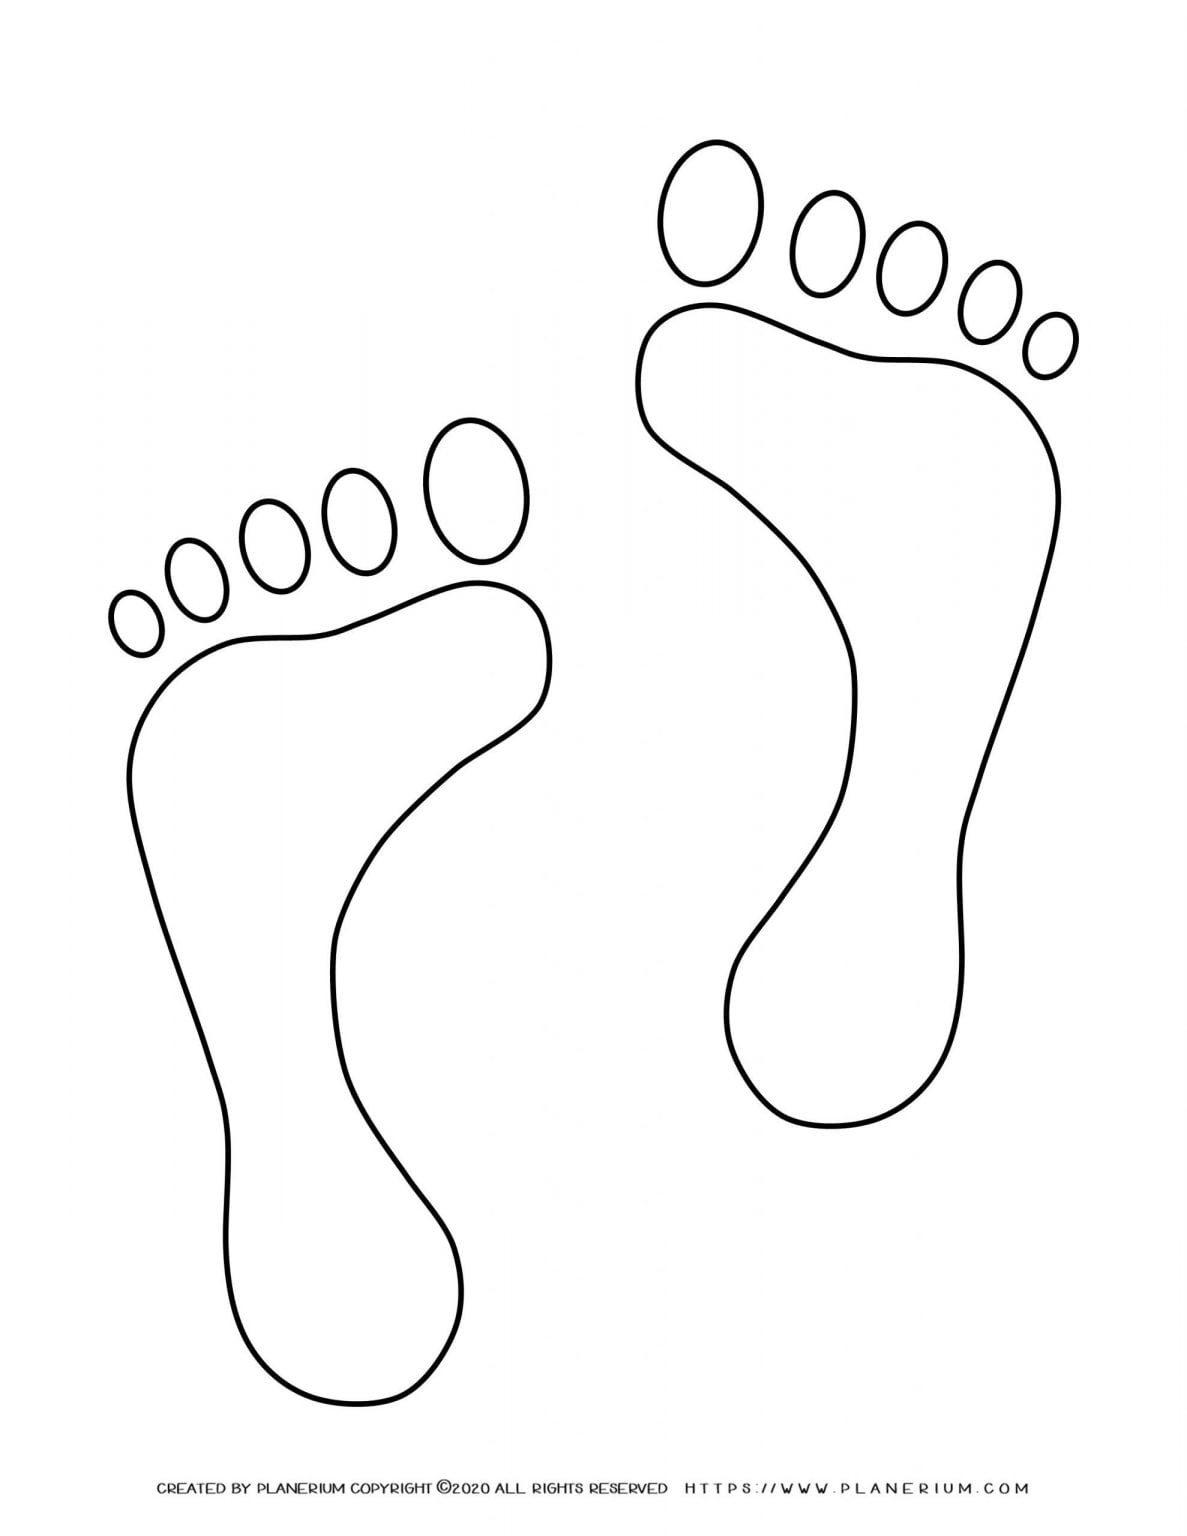 Summer - Coloring Page - Barefoot | Planerium